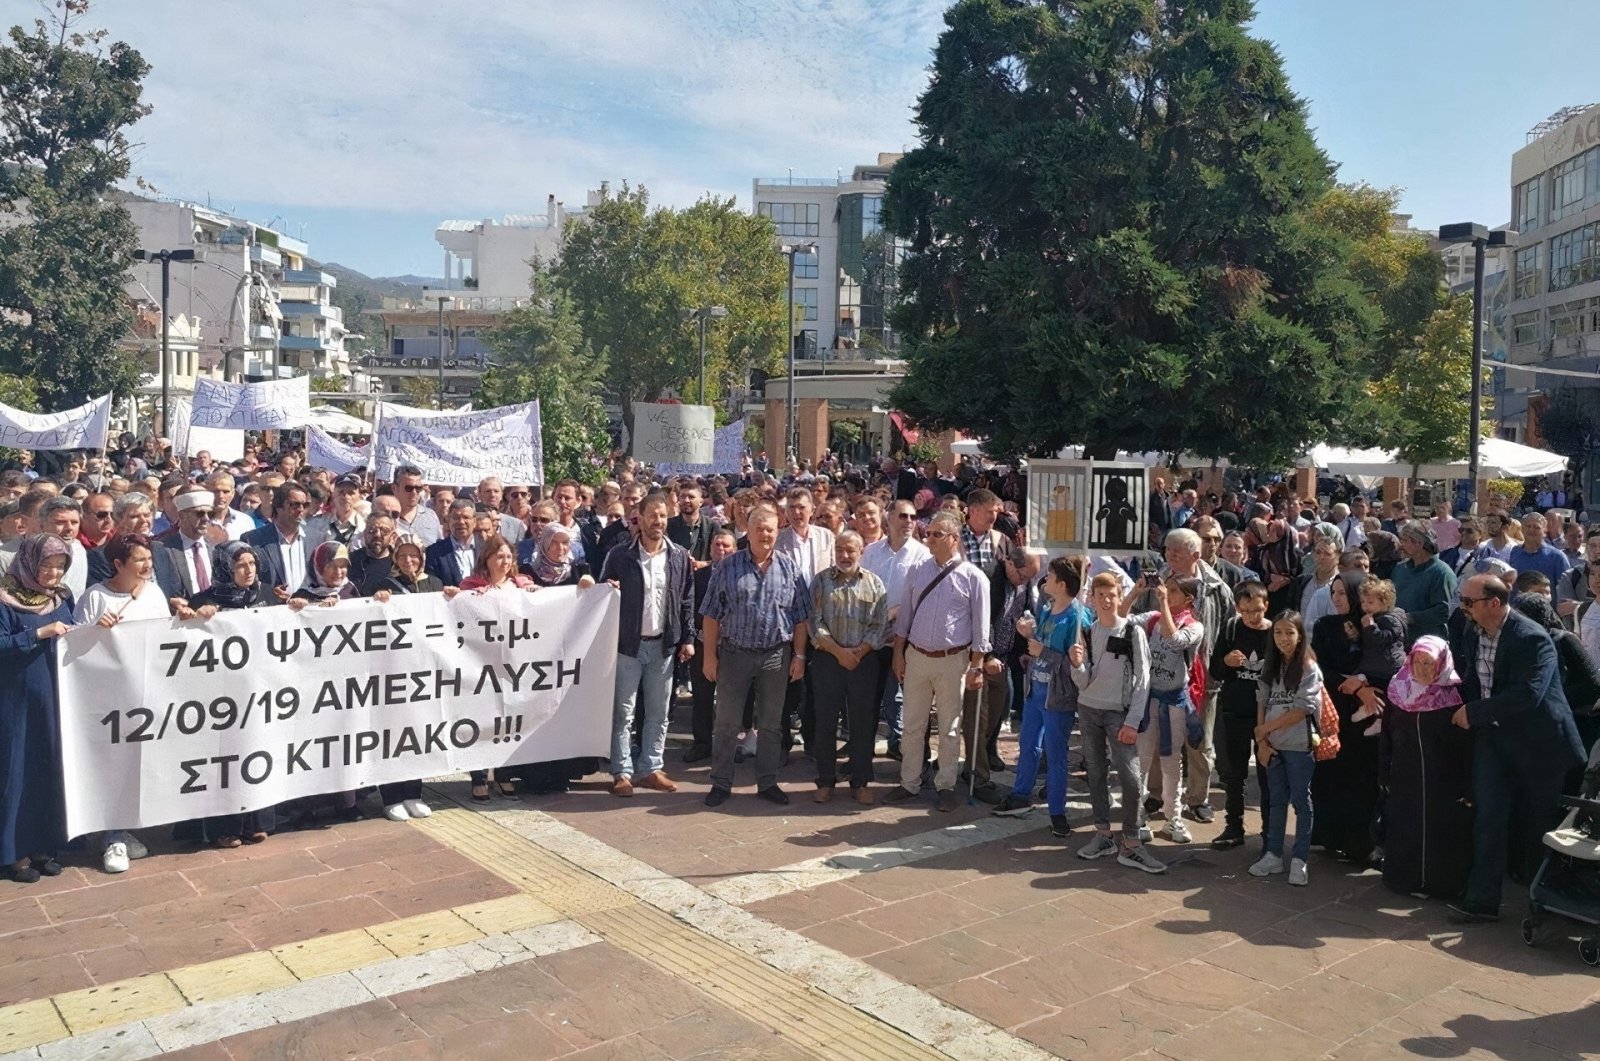 Turks in Western Thrace's Iskeçe (Xanthi) province protest the Greek government's assimilation policies in education, Iskeçe (Xanthi), Western Thrace, Greece, Sept. 24, 2019. (Sabah Photo)